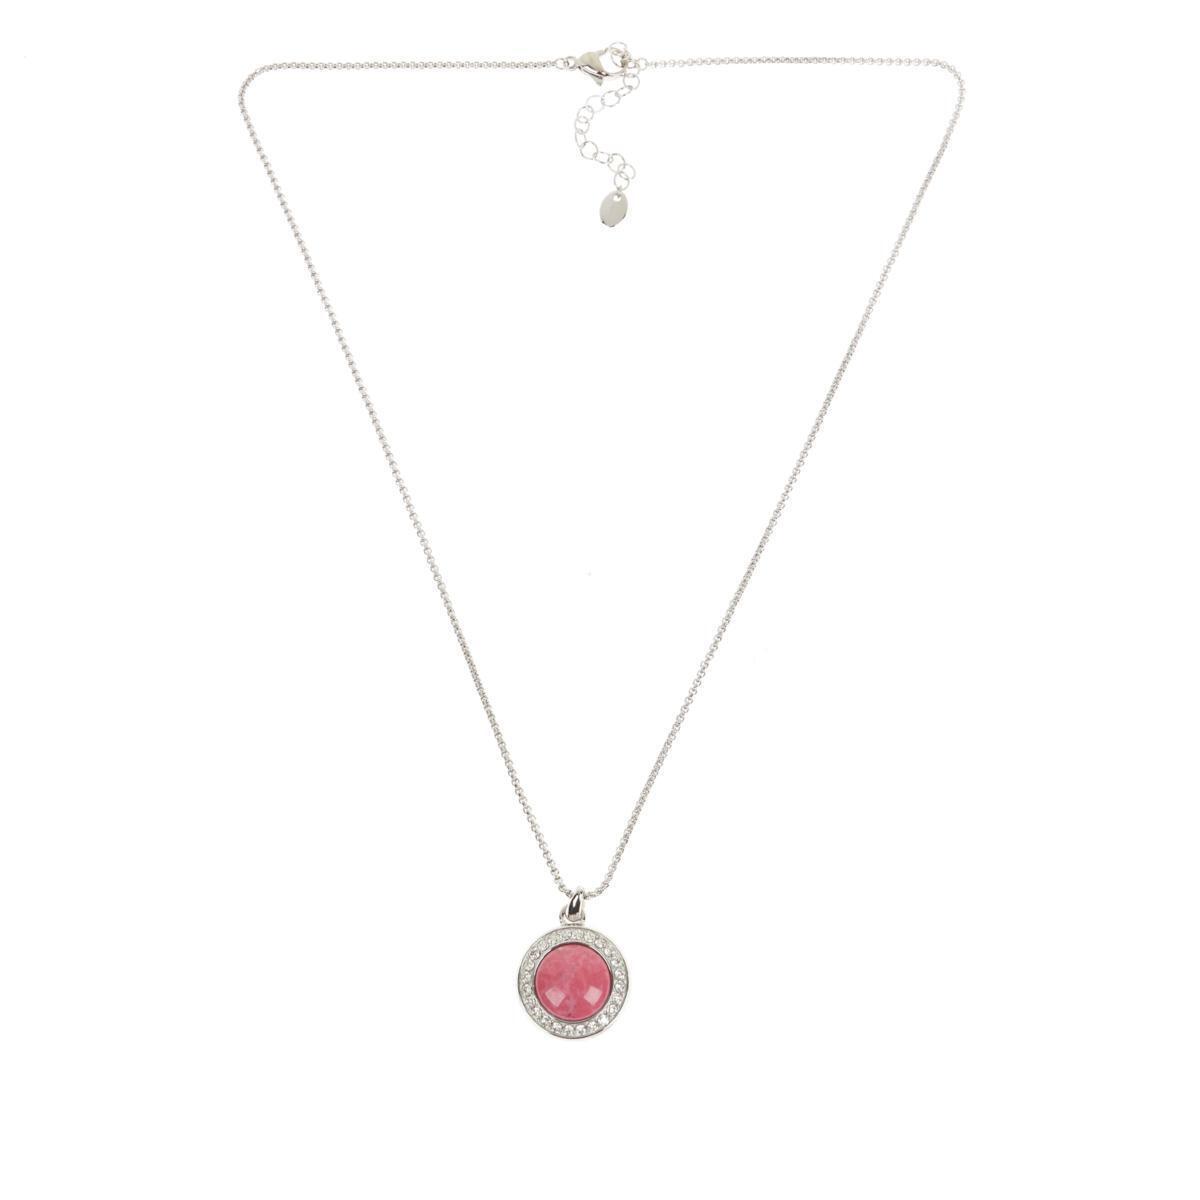 Colleen Lopez Pink Rhodonite Cabochon and White Topaz Pendant with 18" Chain